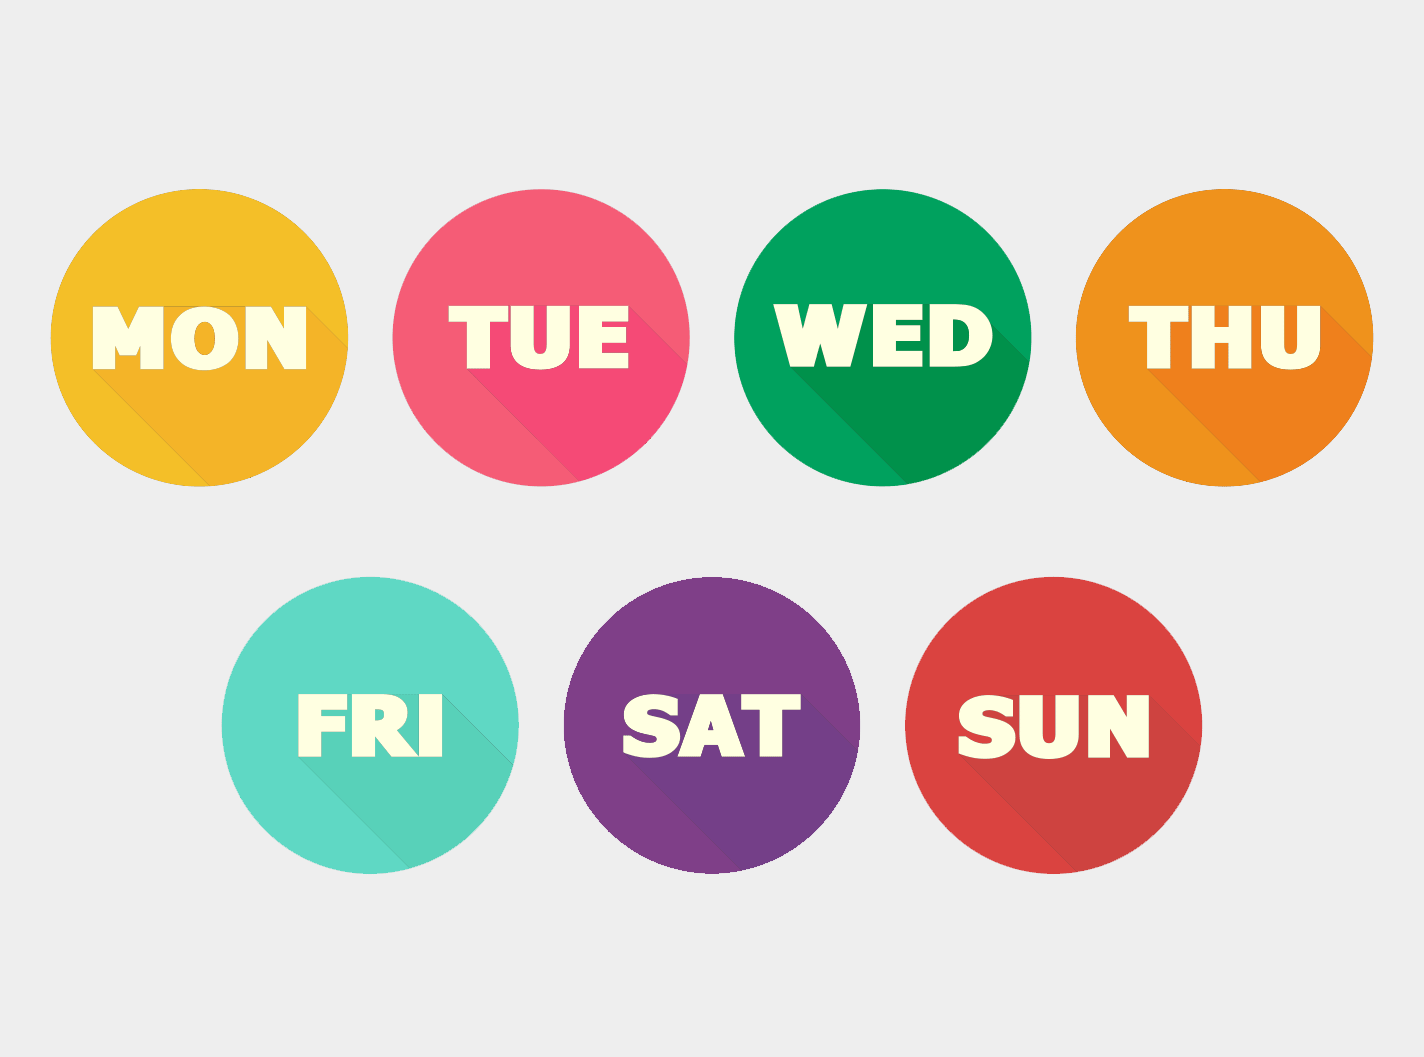 Days of the week in Romanian